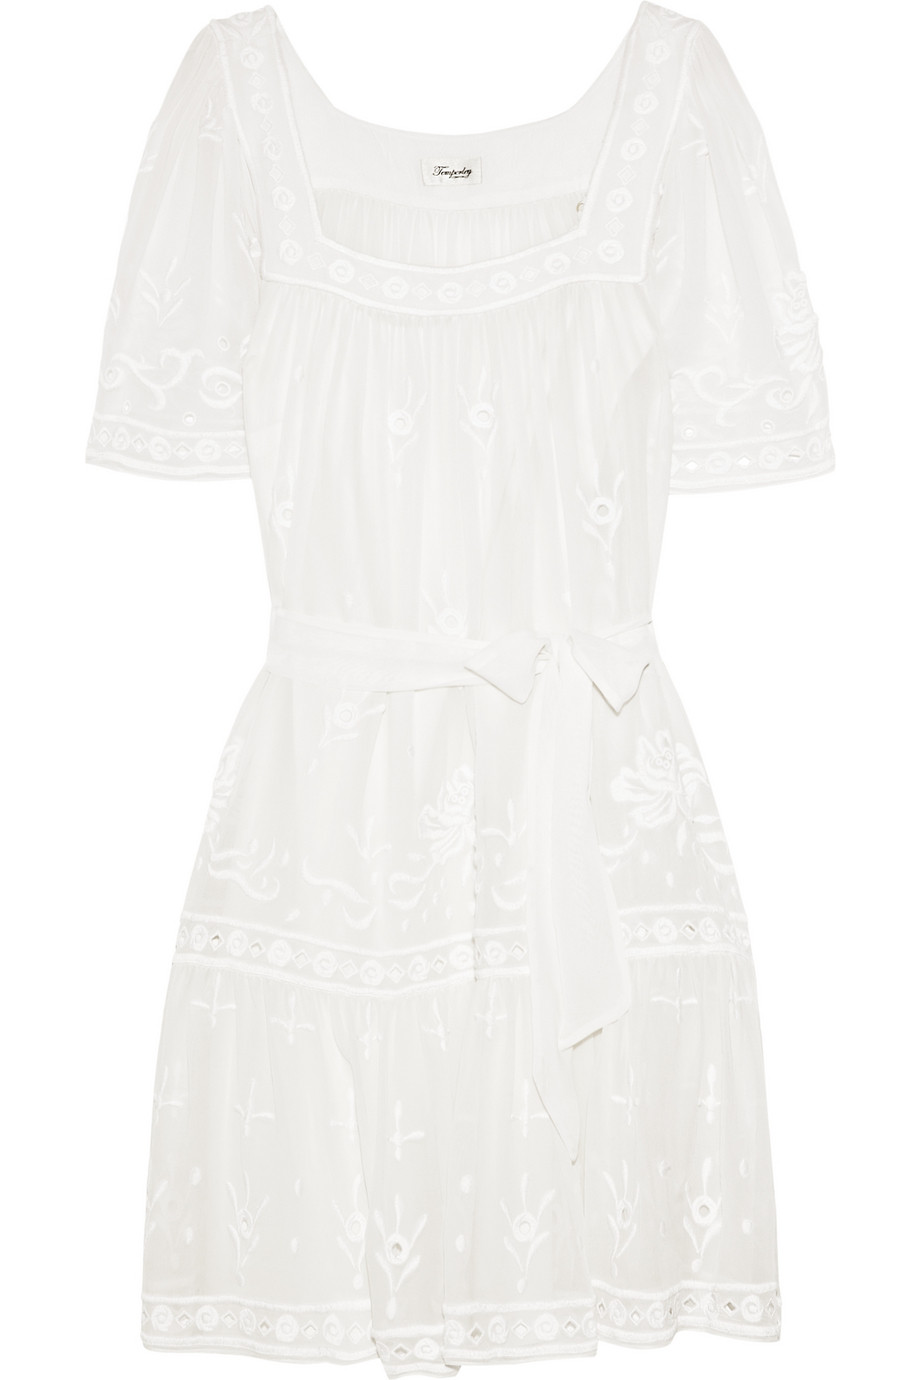 Temperley london Hawaii Embroidered Silk-georgette Dress in White | Lyst